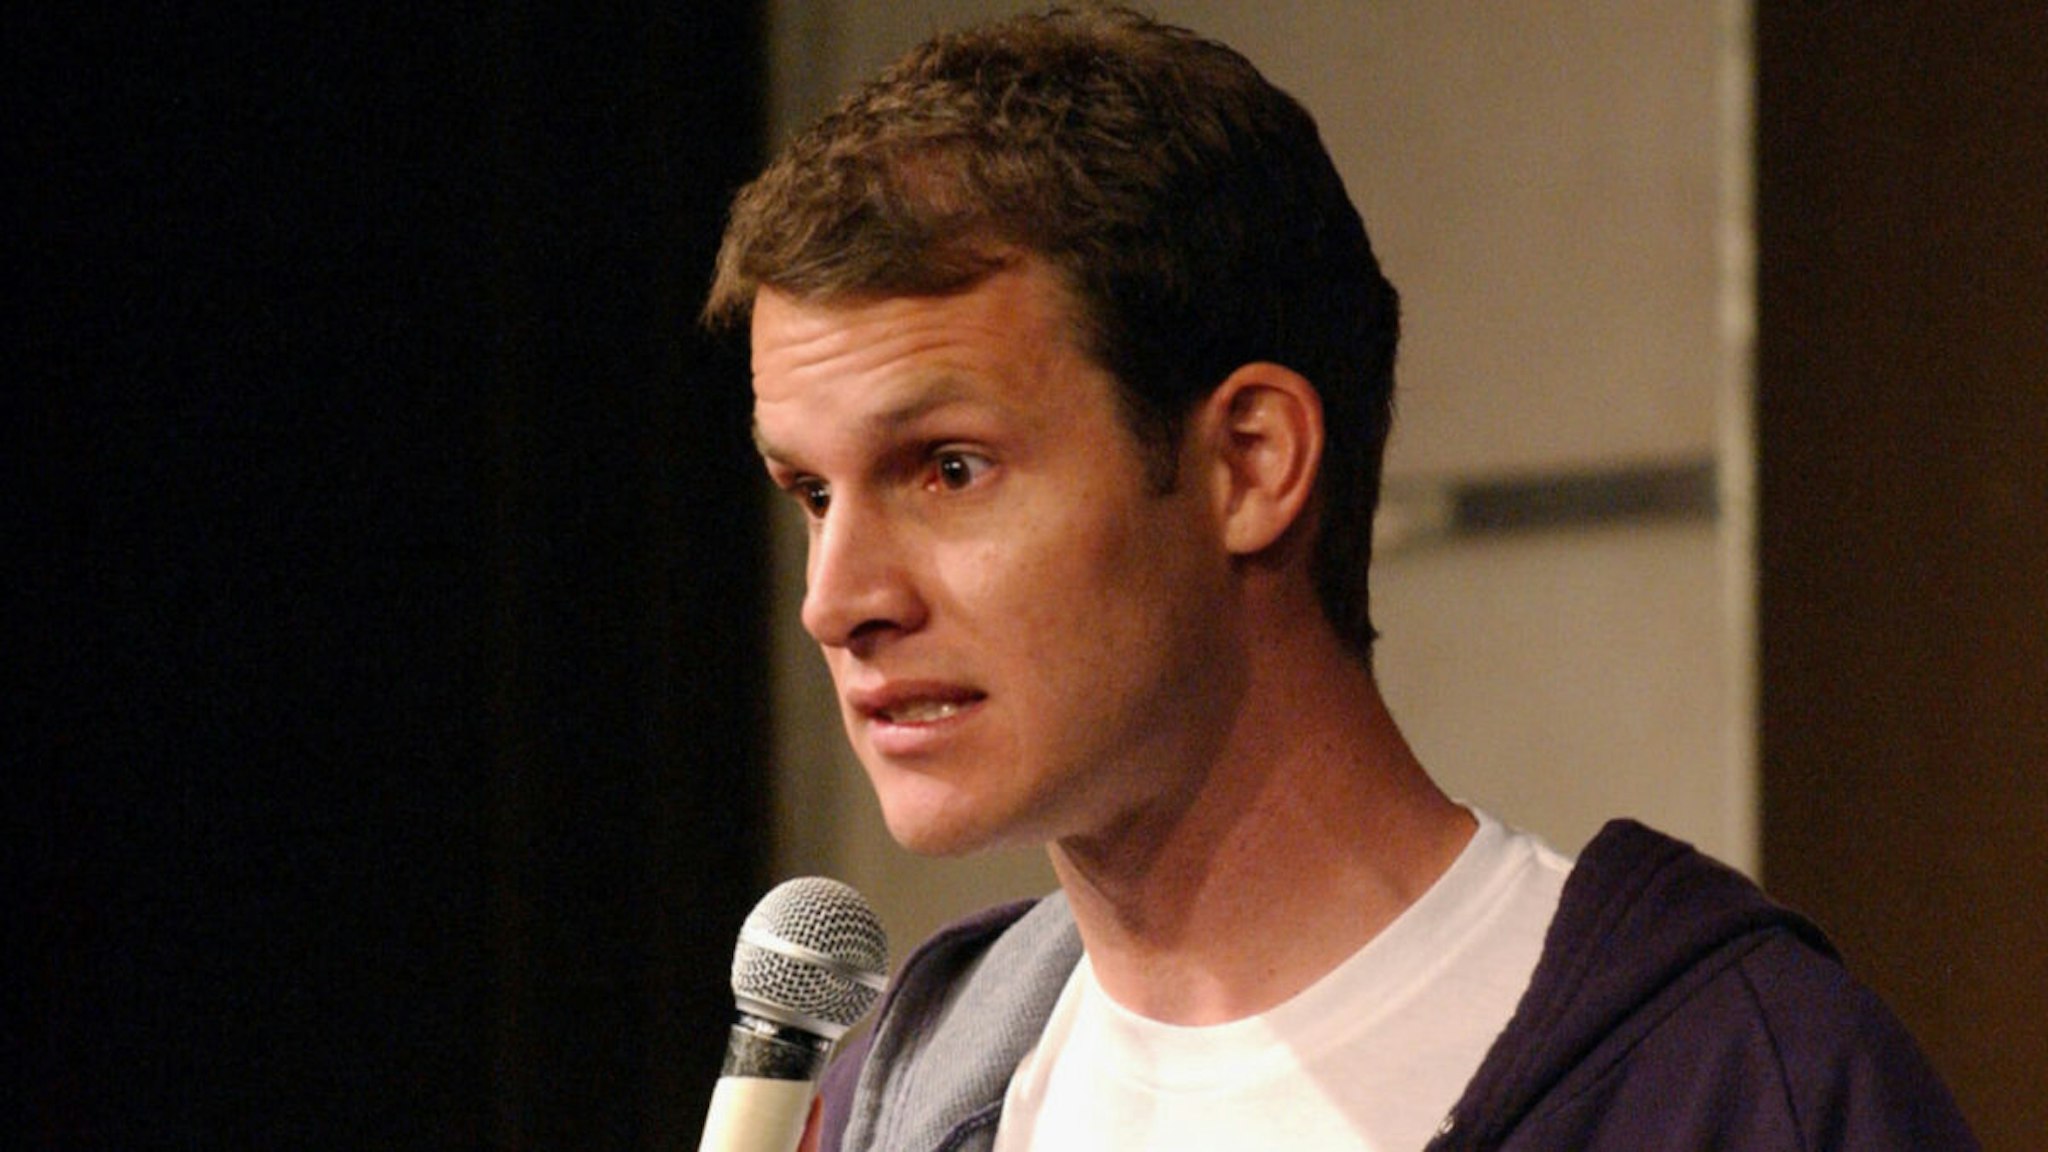 Daniel Tosh performs at the Hollywood Improv on February 20, 2008 in Los Angeles, CA.